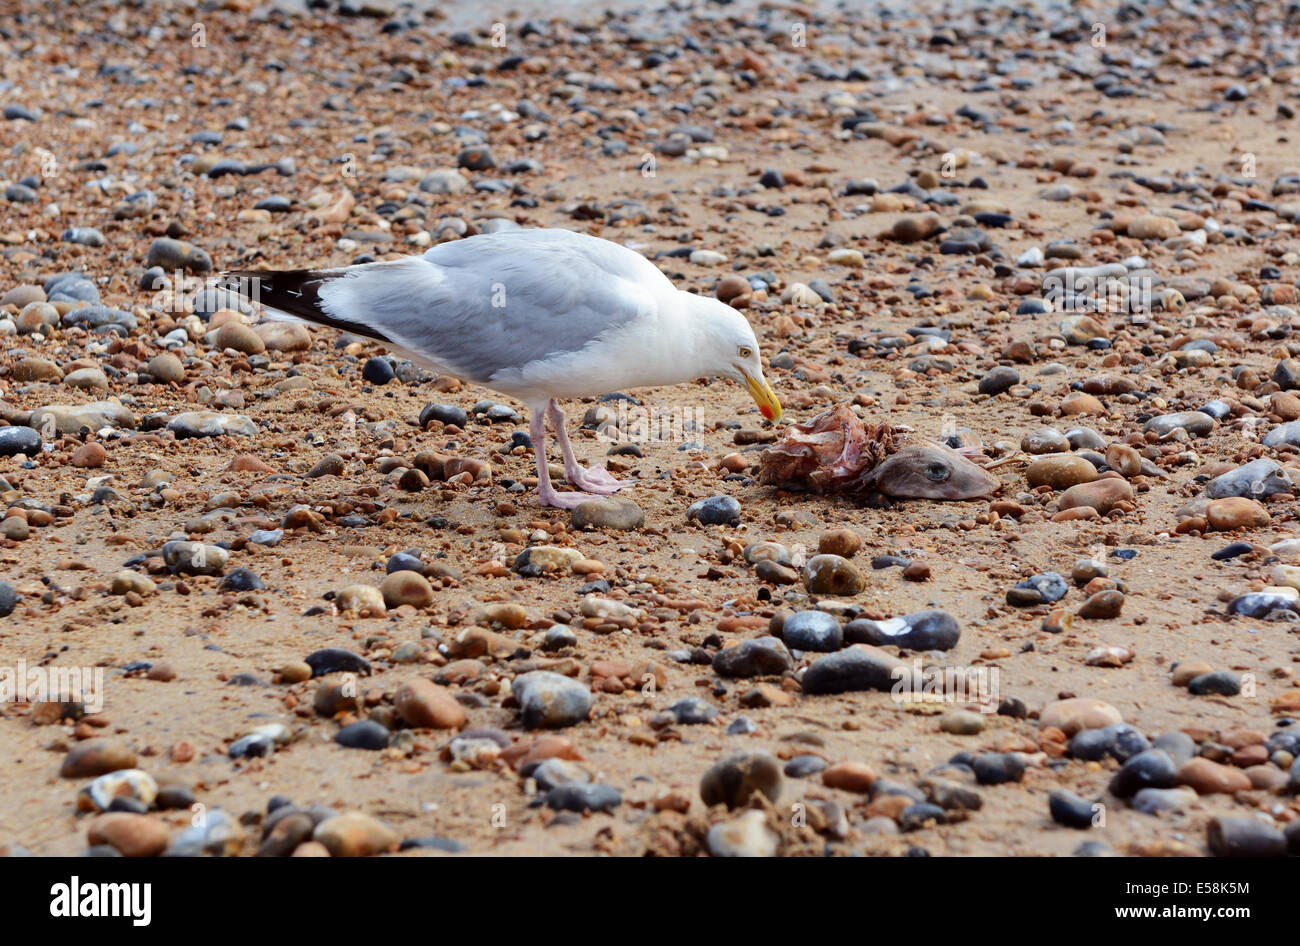 Seagull inspects the carcass of a smooth-hound shark that has washed ashore Stock Photo